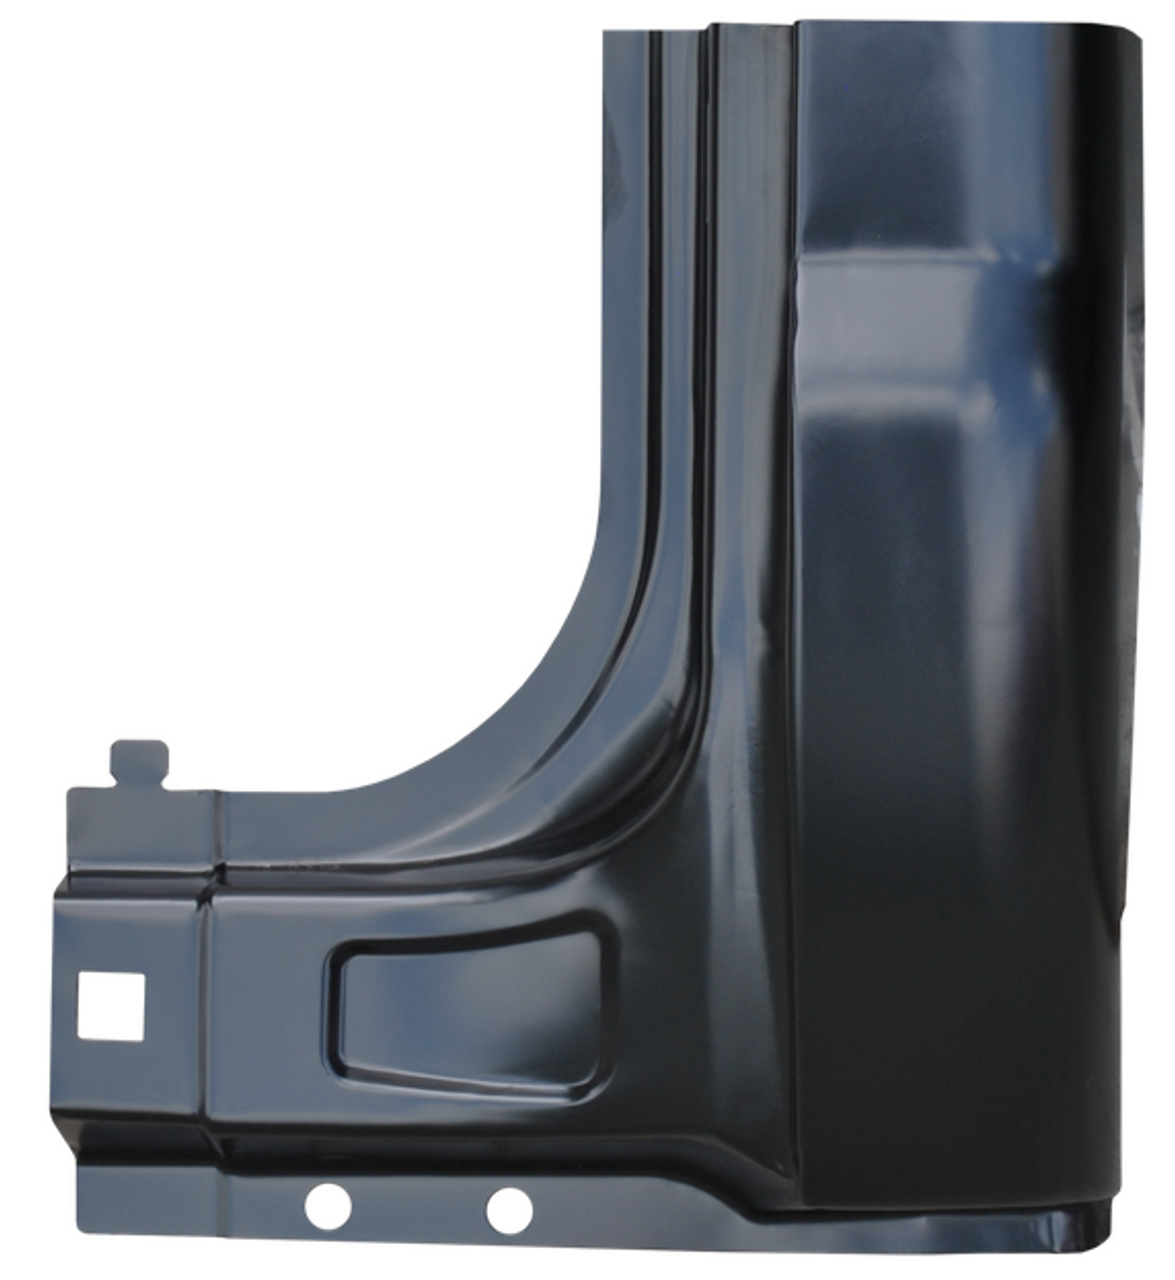 Lh 1999-2016 Superduty OE Outer Inner Cab Corners With Rear Pillar (4 Door Extended Cab)